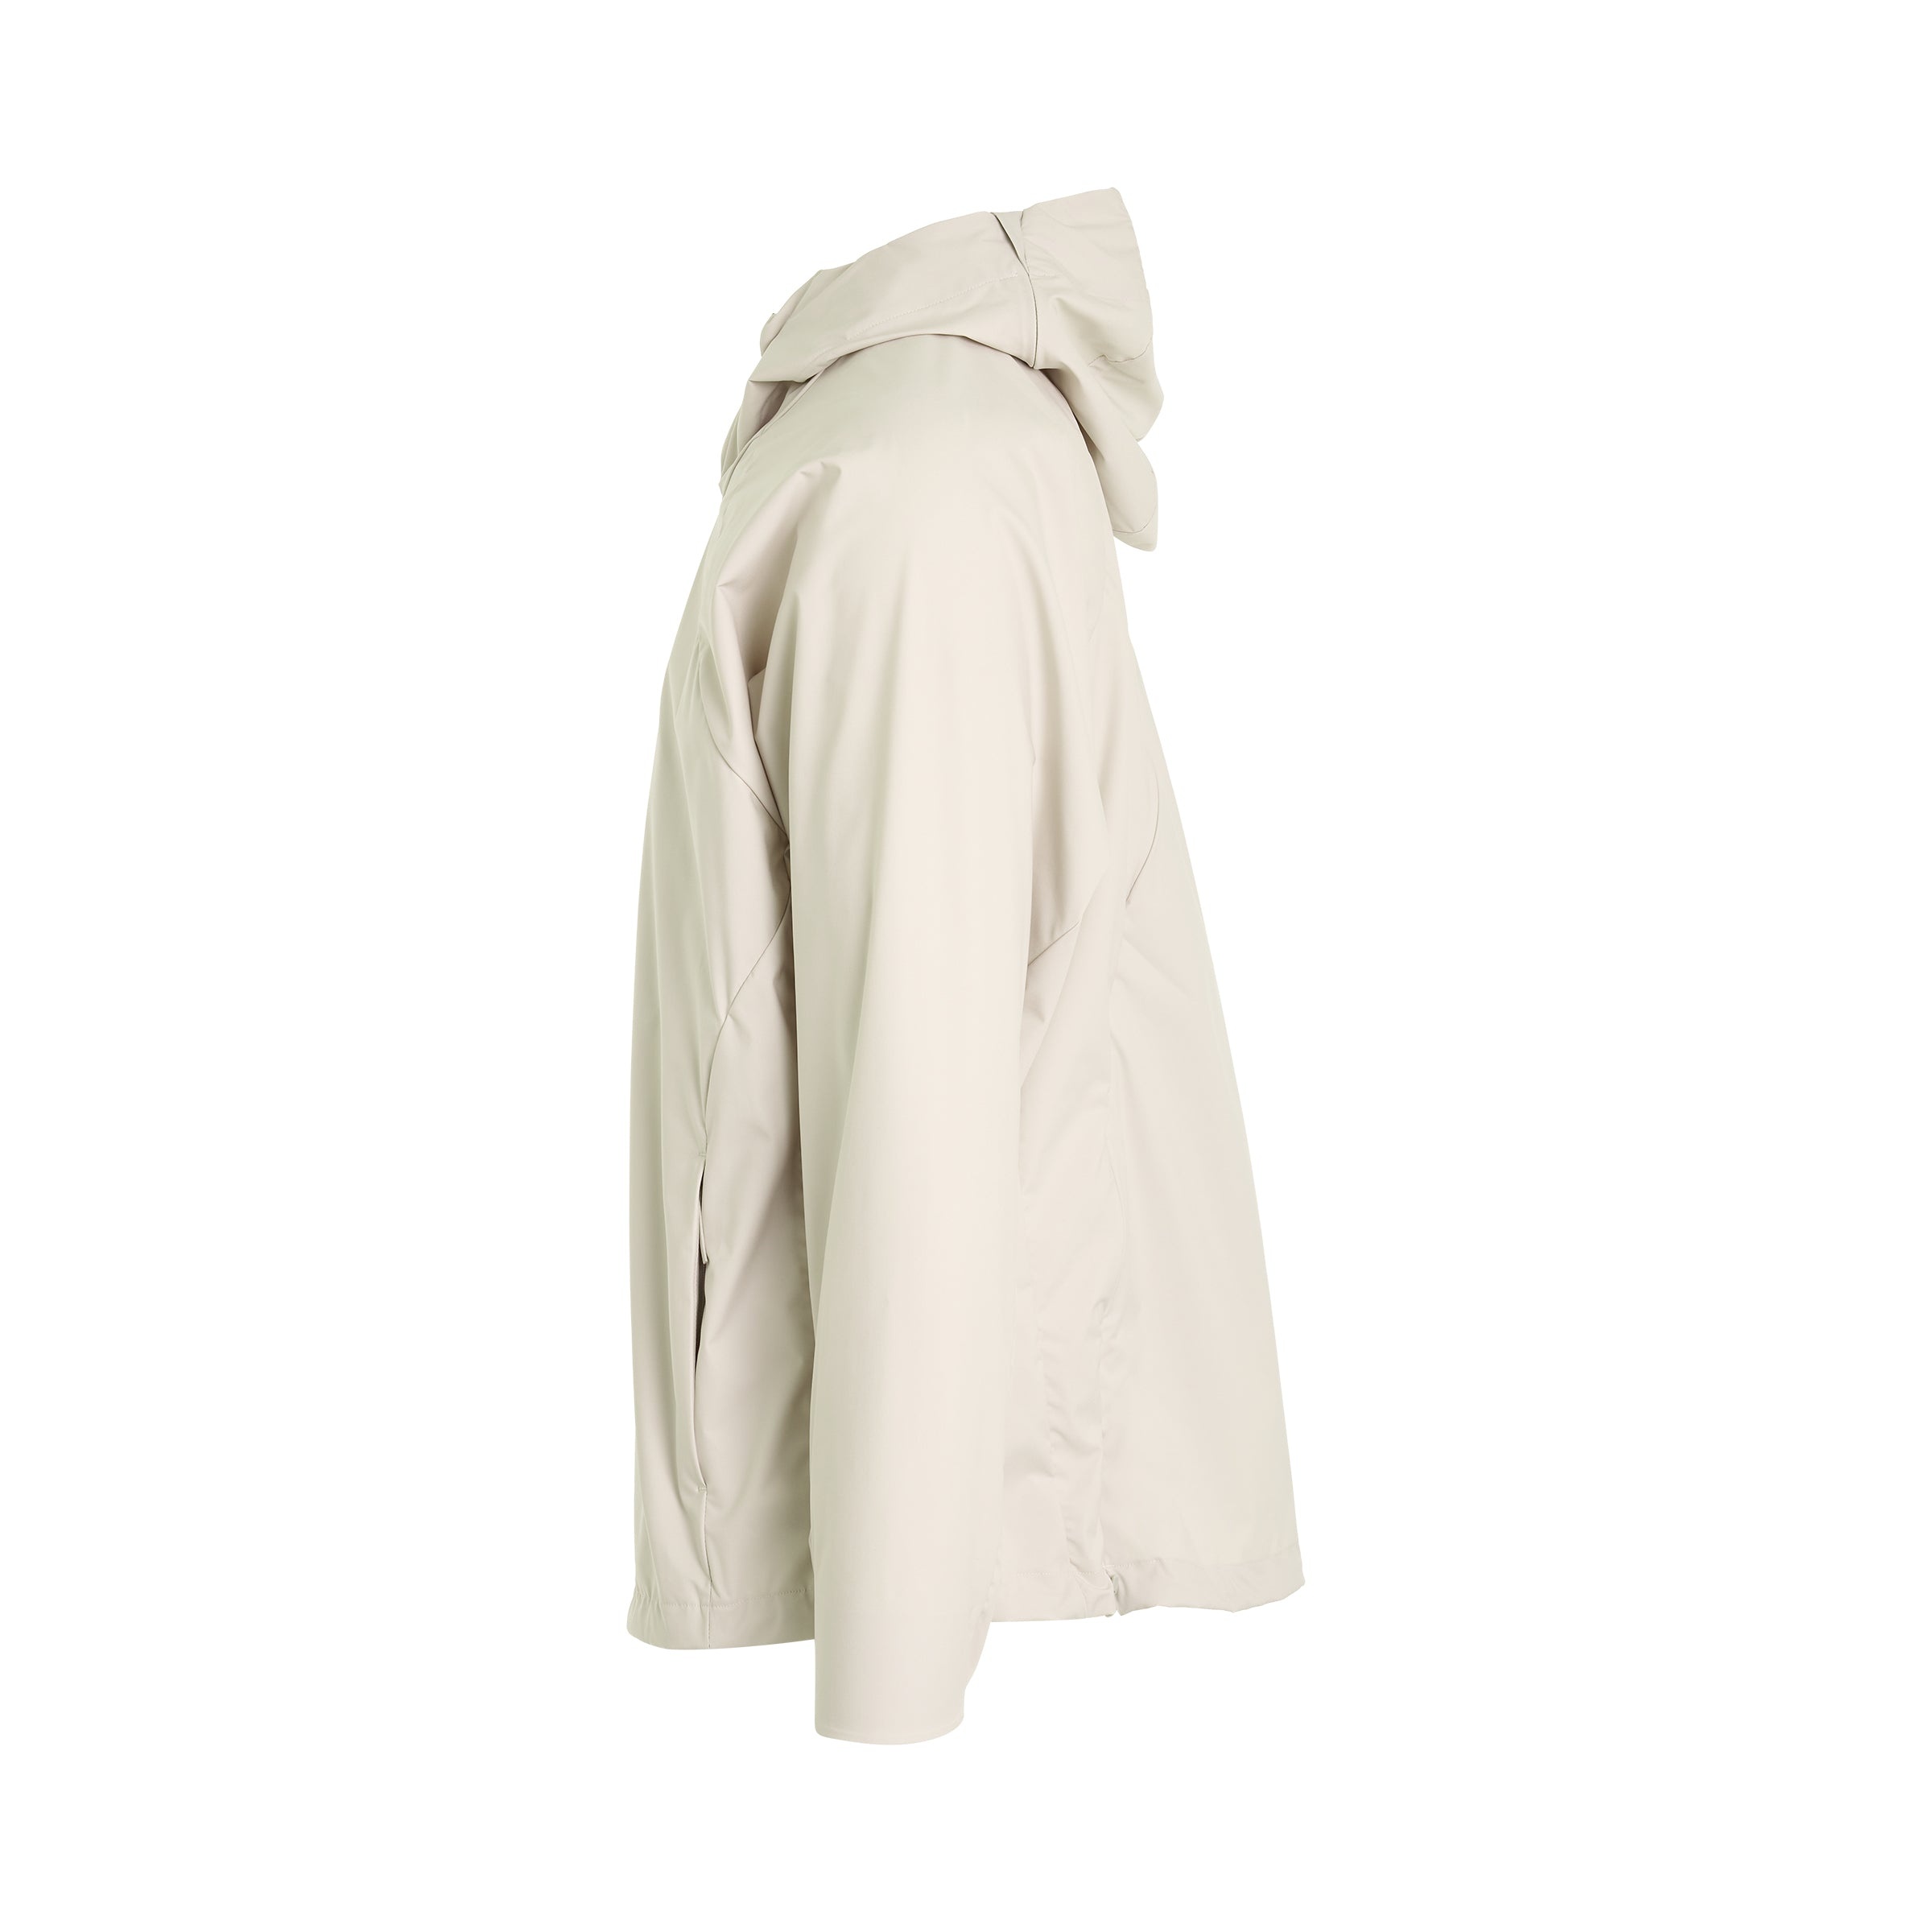 6.0 Technical Jacket (Center) in Ivory - 3